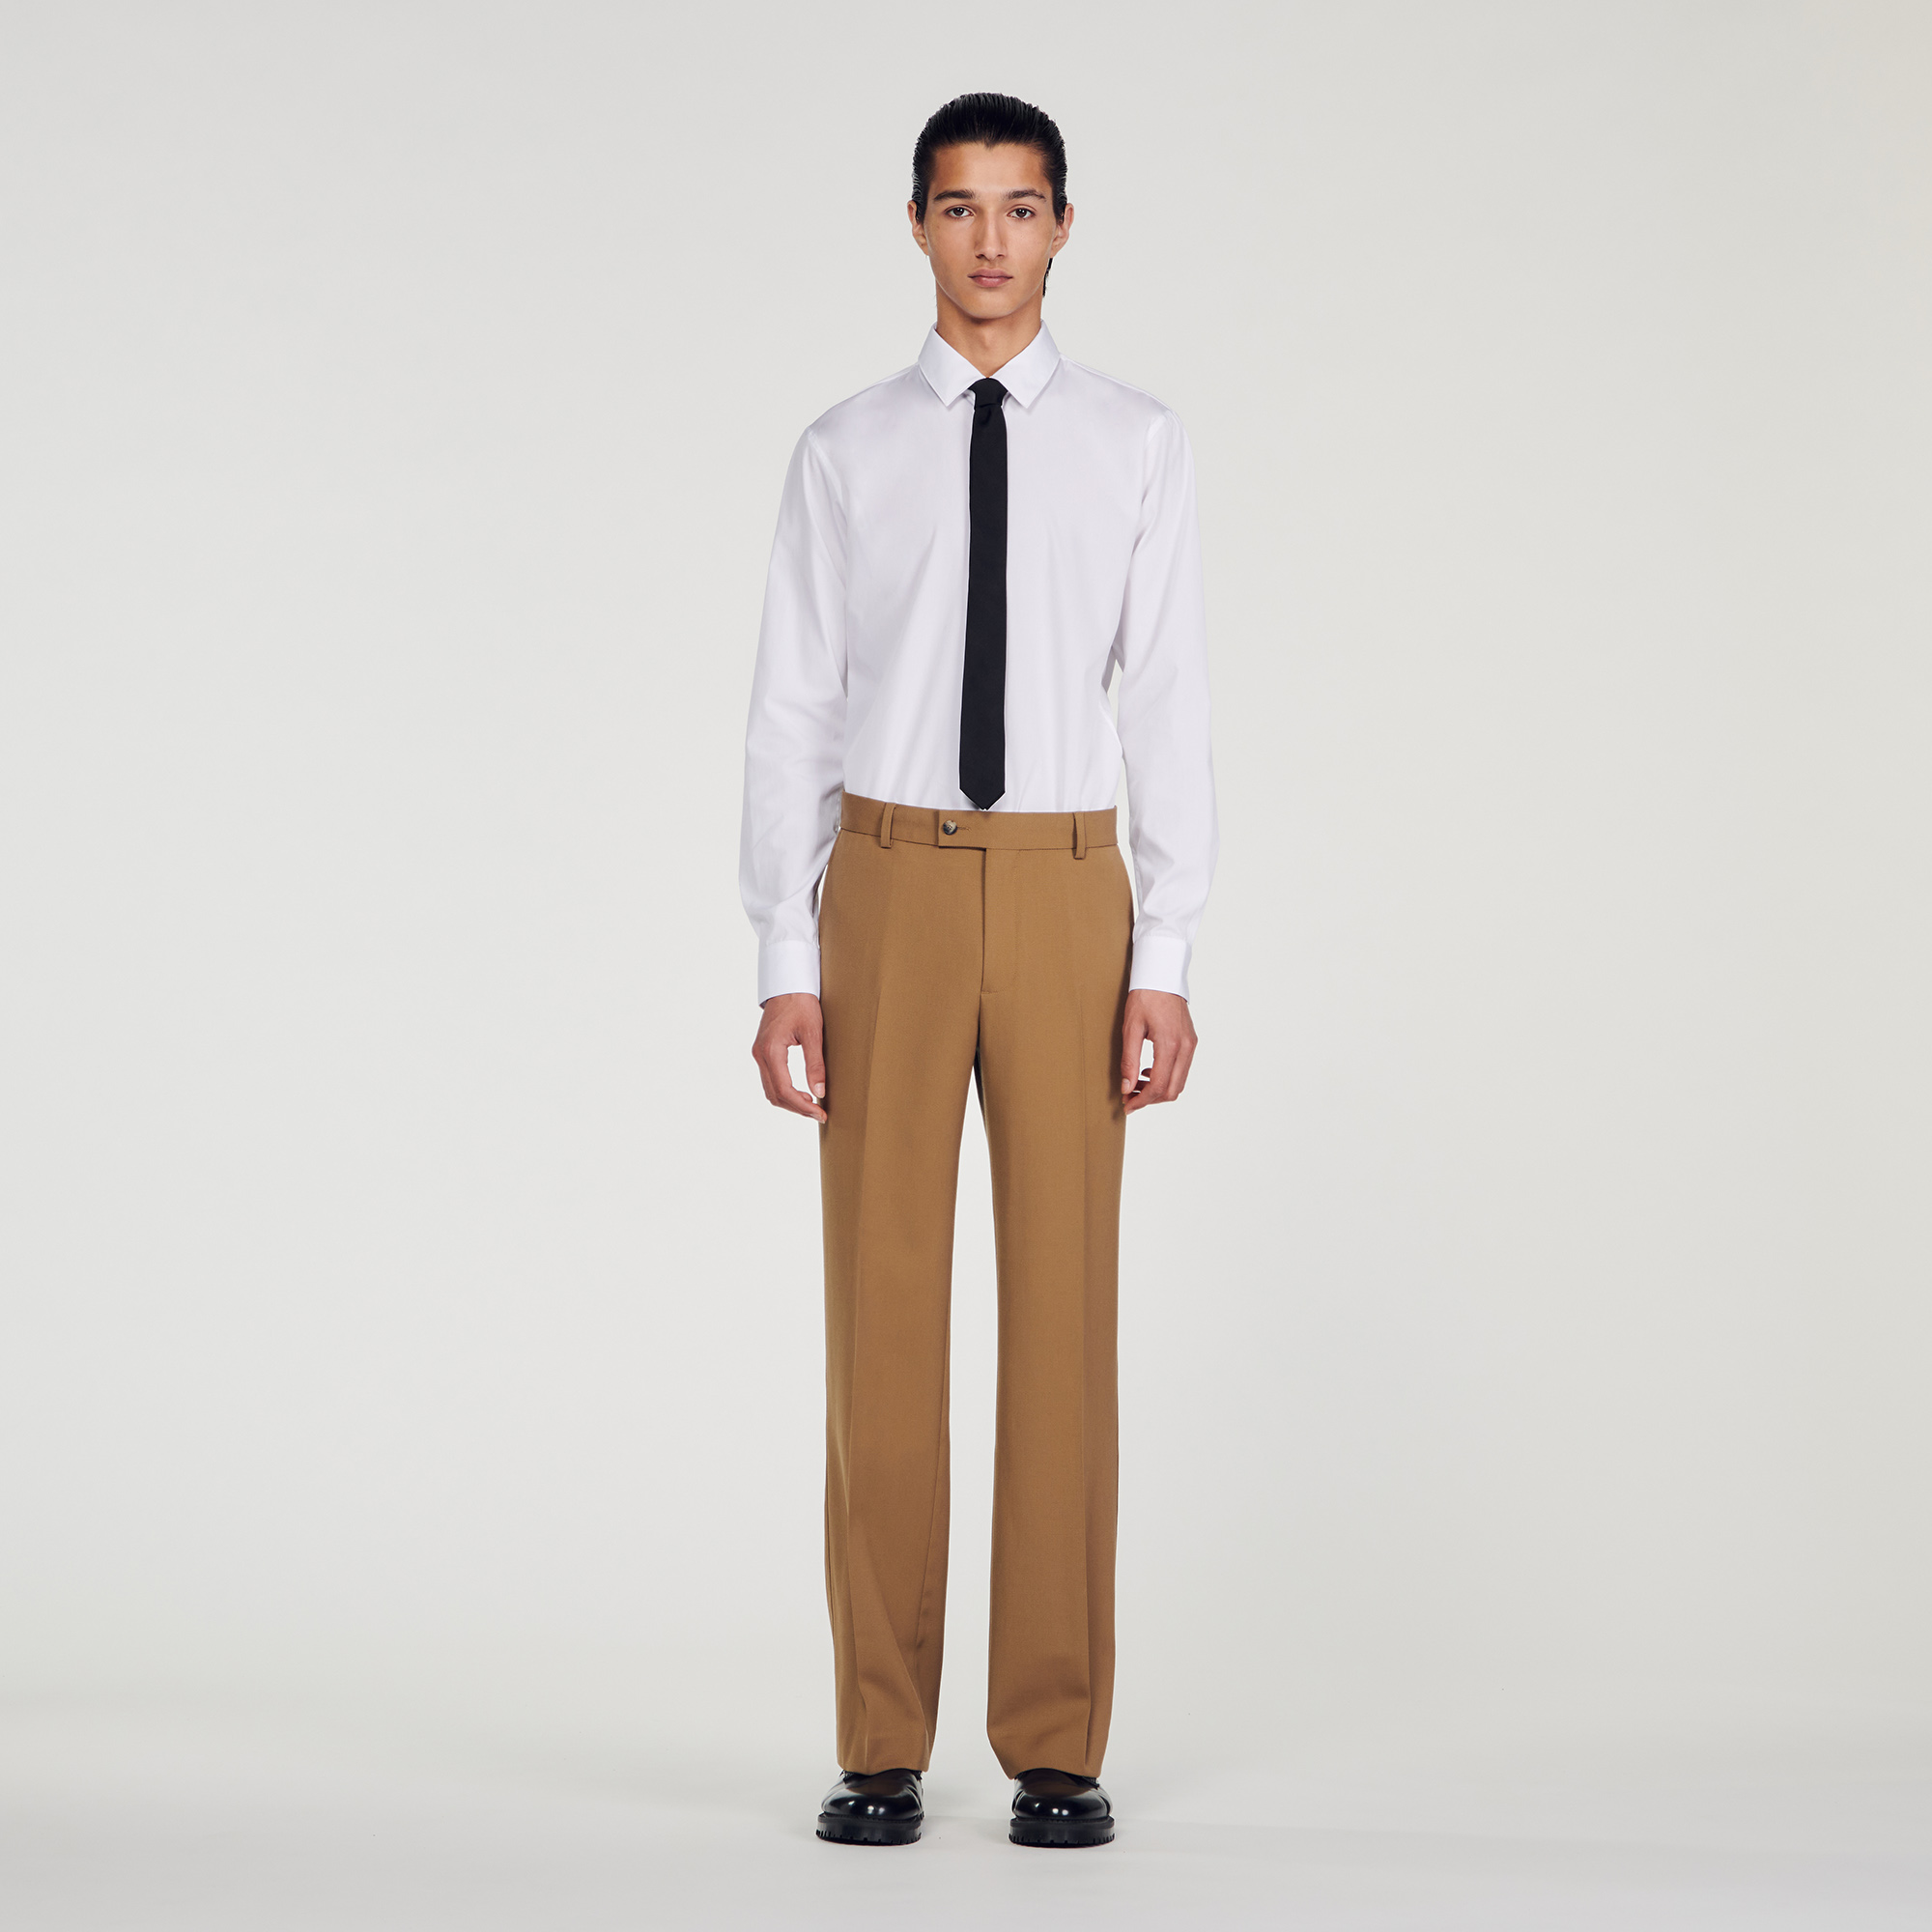 Sandro virgin wool Belt lining: Wide-leg cool wool suit pants with a high waist and front and back pockets